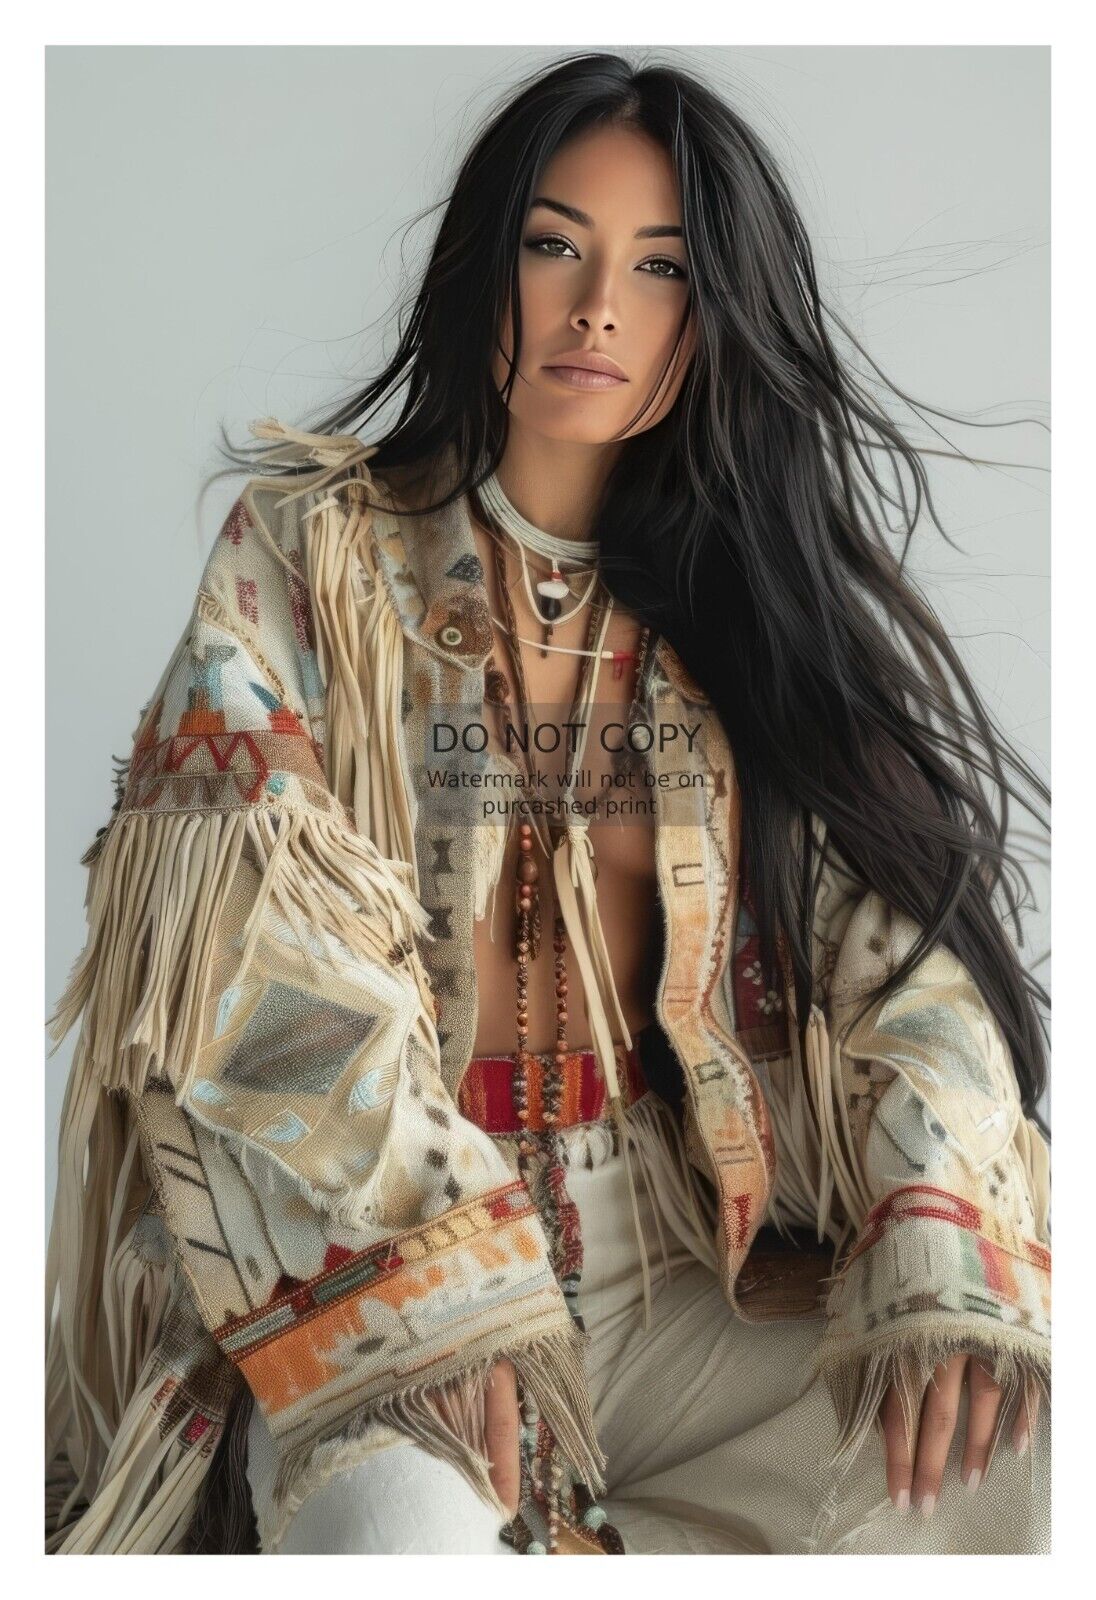 GORGEOUS YOUNG SEXY NATIVE AMERICAN LADY LONG HAIR 4X6 FANTASY PHOTO